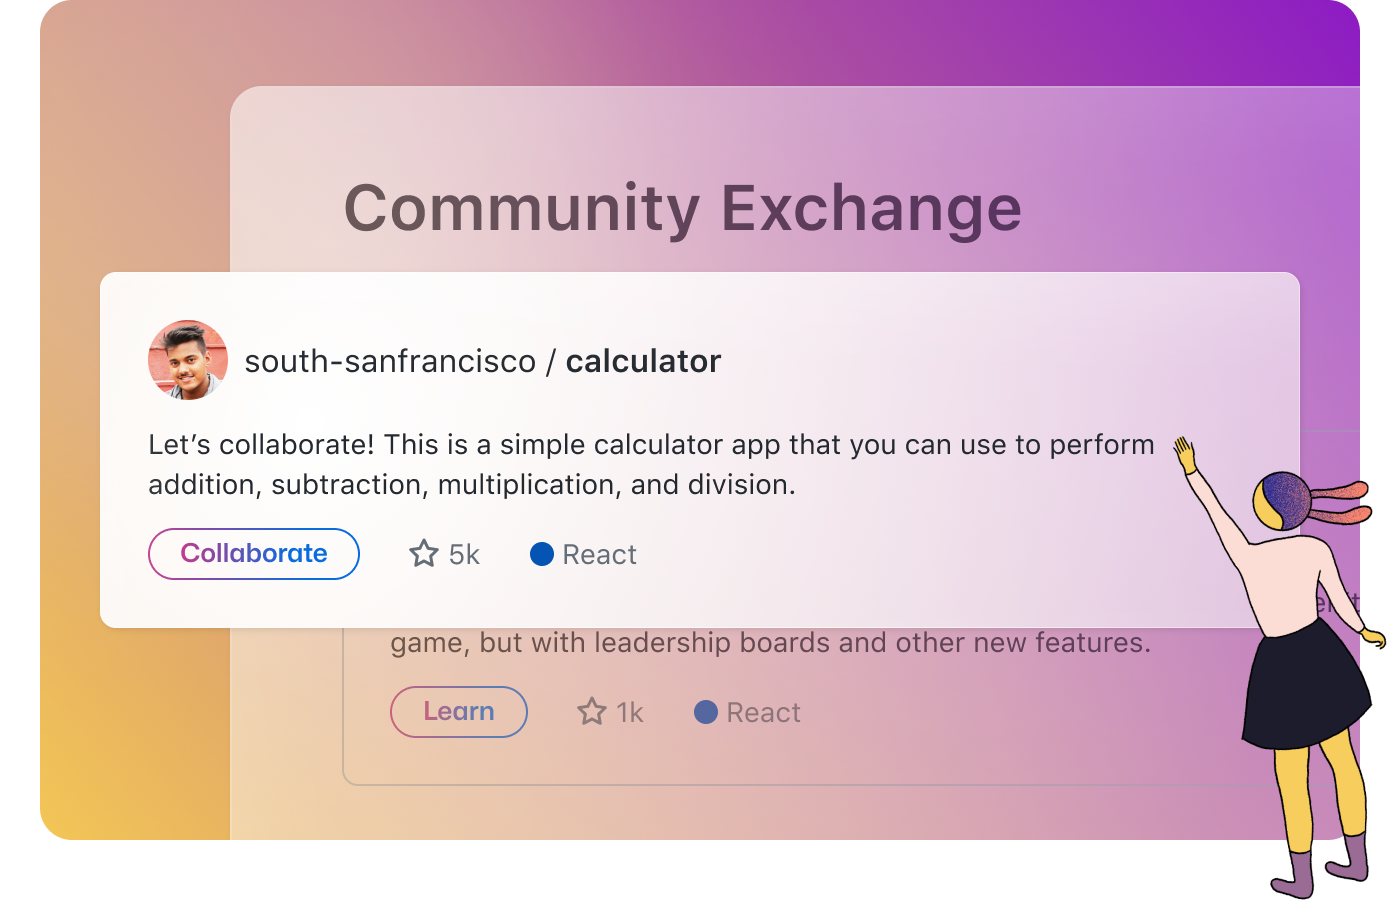 Popup displaying a comment from handle south-sanfrancisco saying "Let's collaborate! This is a simple calculator app that you can use to perform addition, subtraction, multiplication, and division.